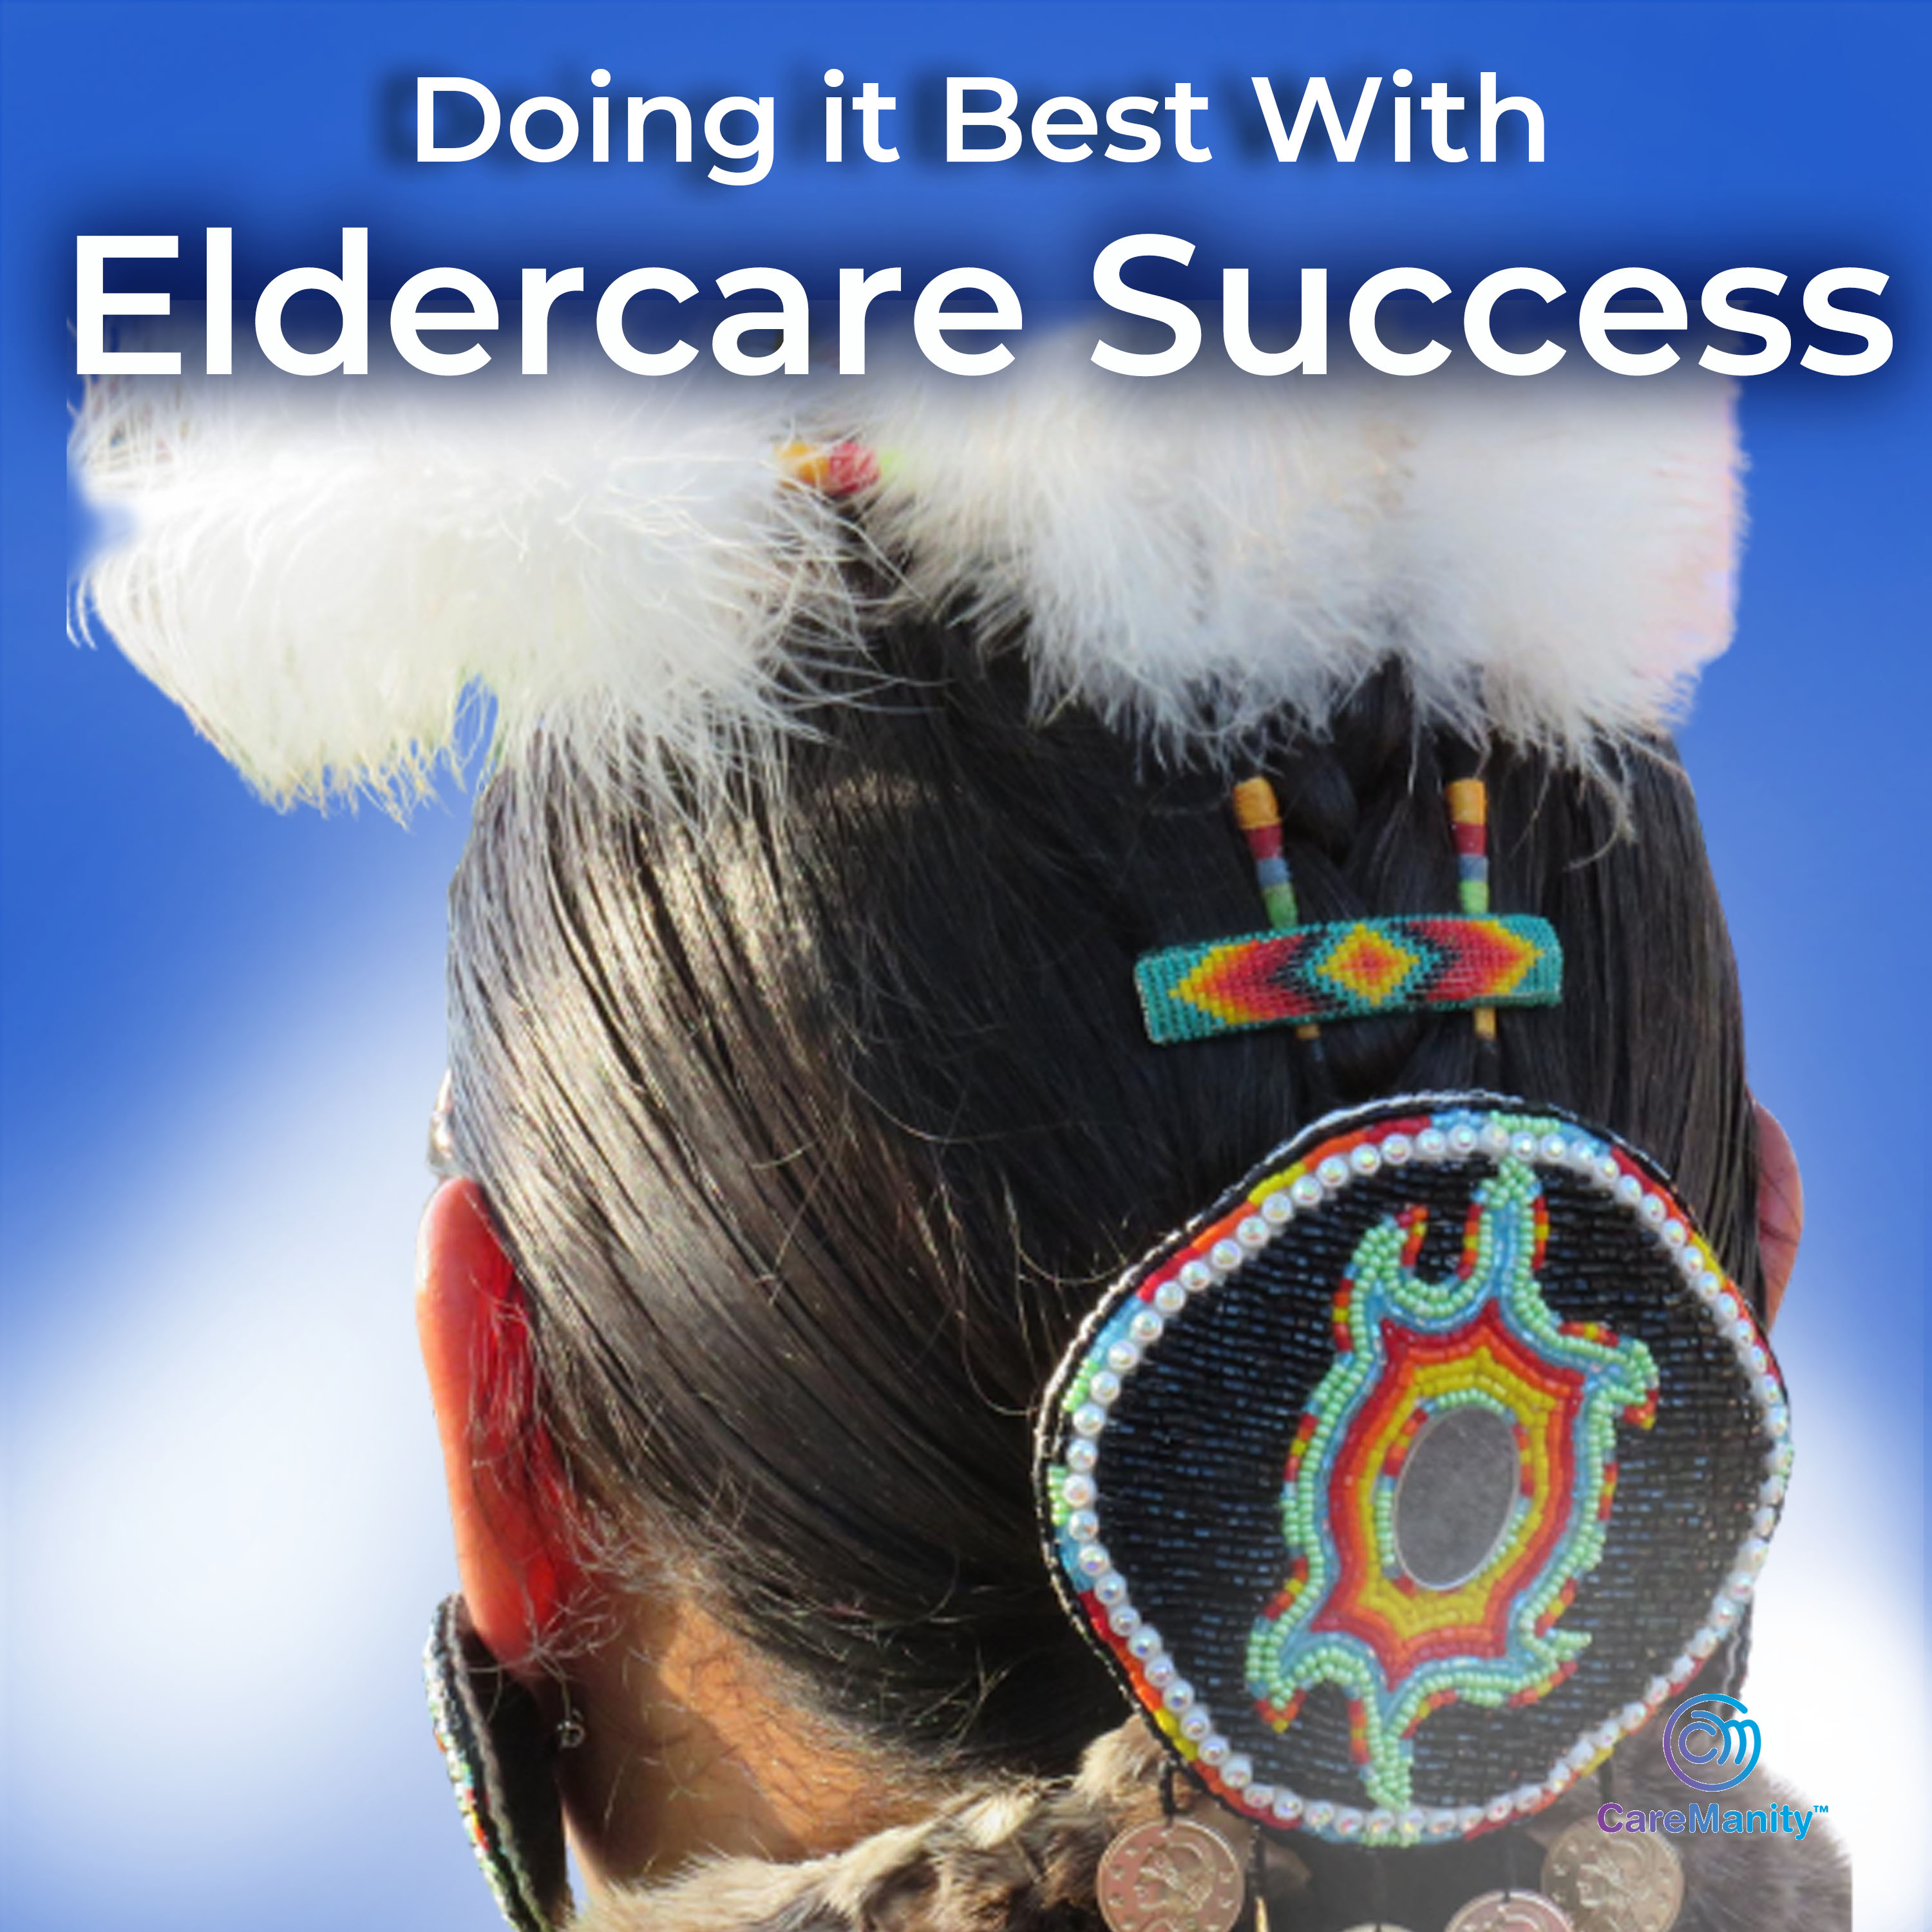 Native Caregivers and Sprit Guides: Life Lessons and More.